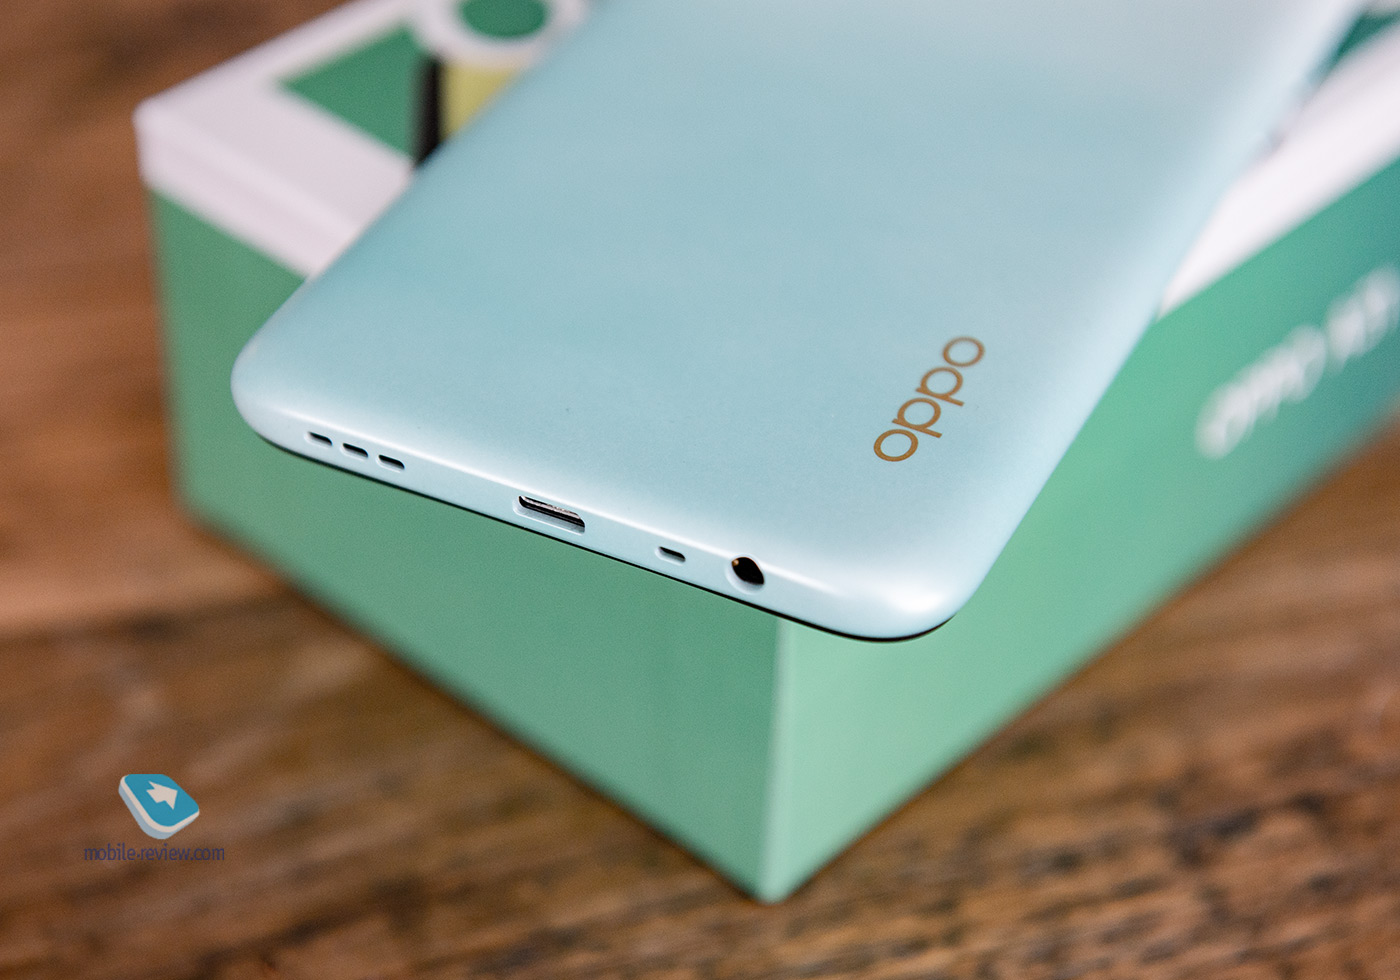 Oppo A31 (СPH2015) review